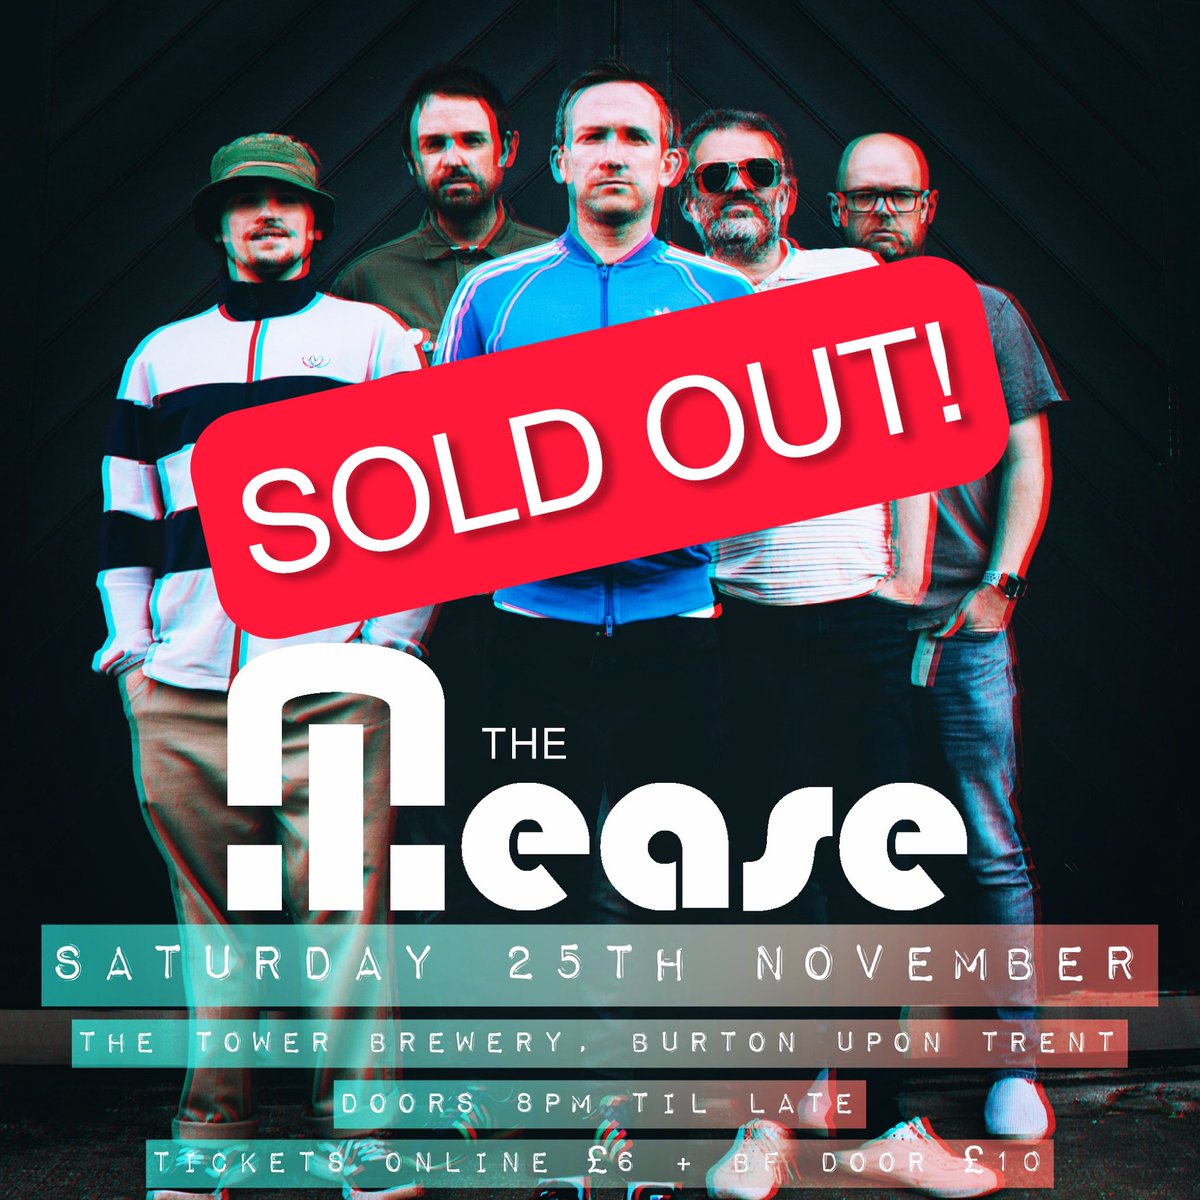 Our show on Saturday with @marseilleband has now SOLD OUT! 

Sorry to those who missed out this time. The rest of you, see you at the front!

#newmusic #bestnewbands #bestlivebands #rocknroll